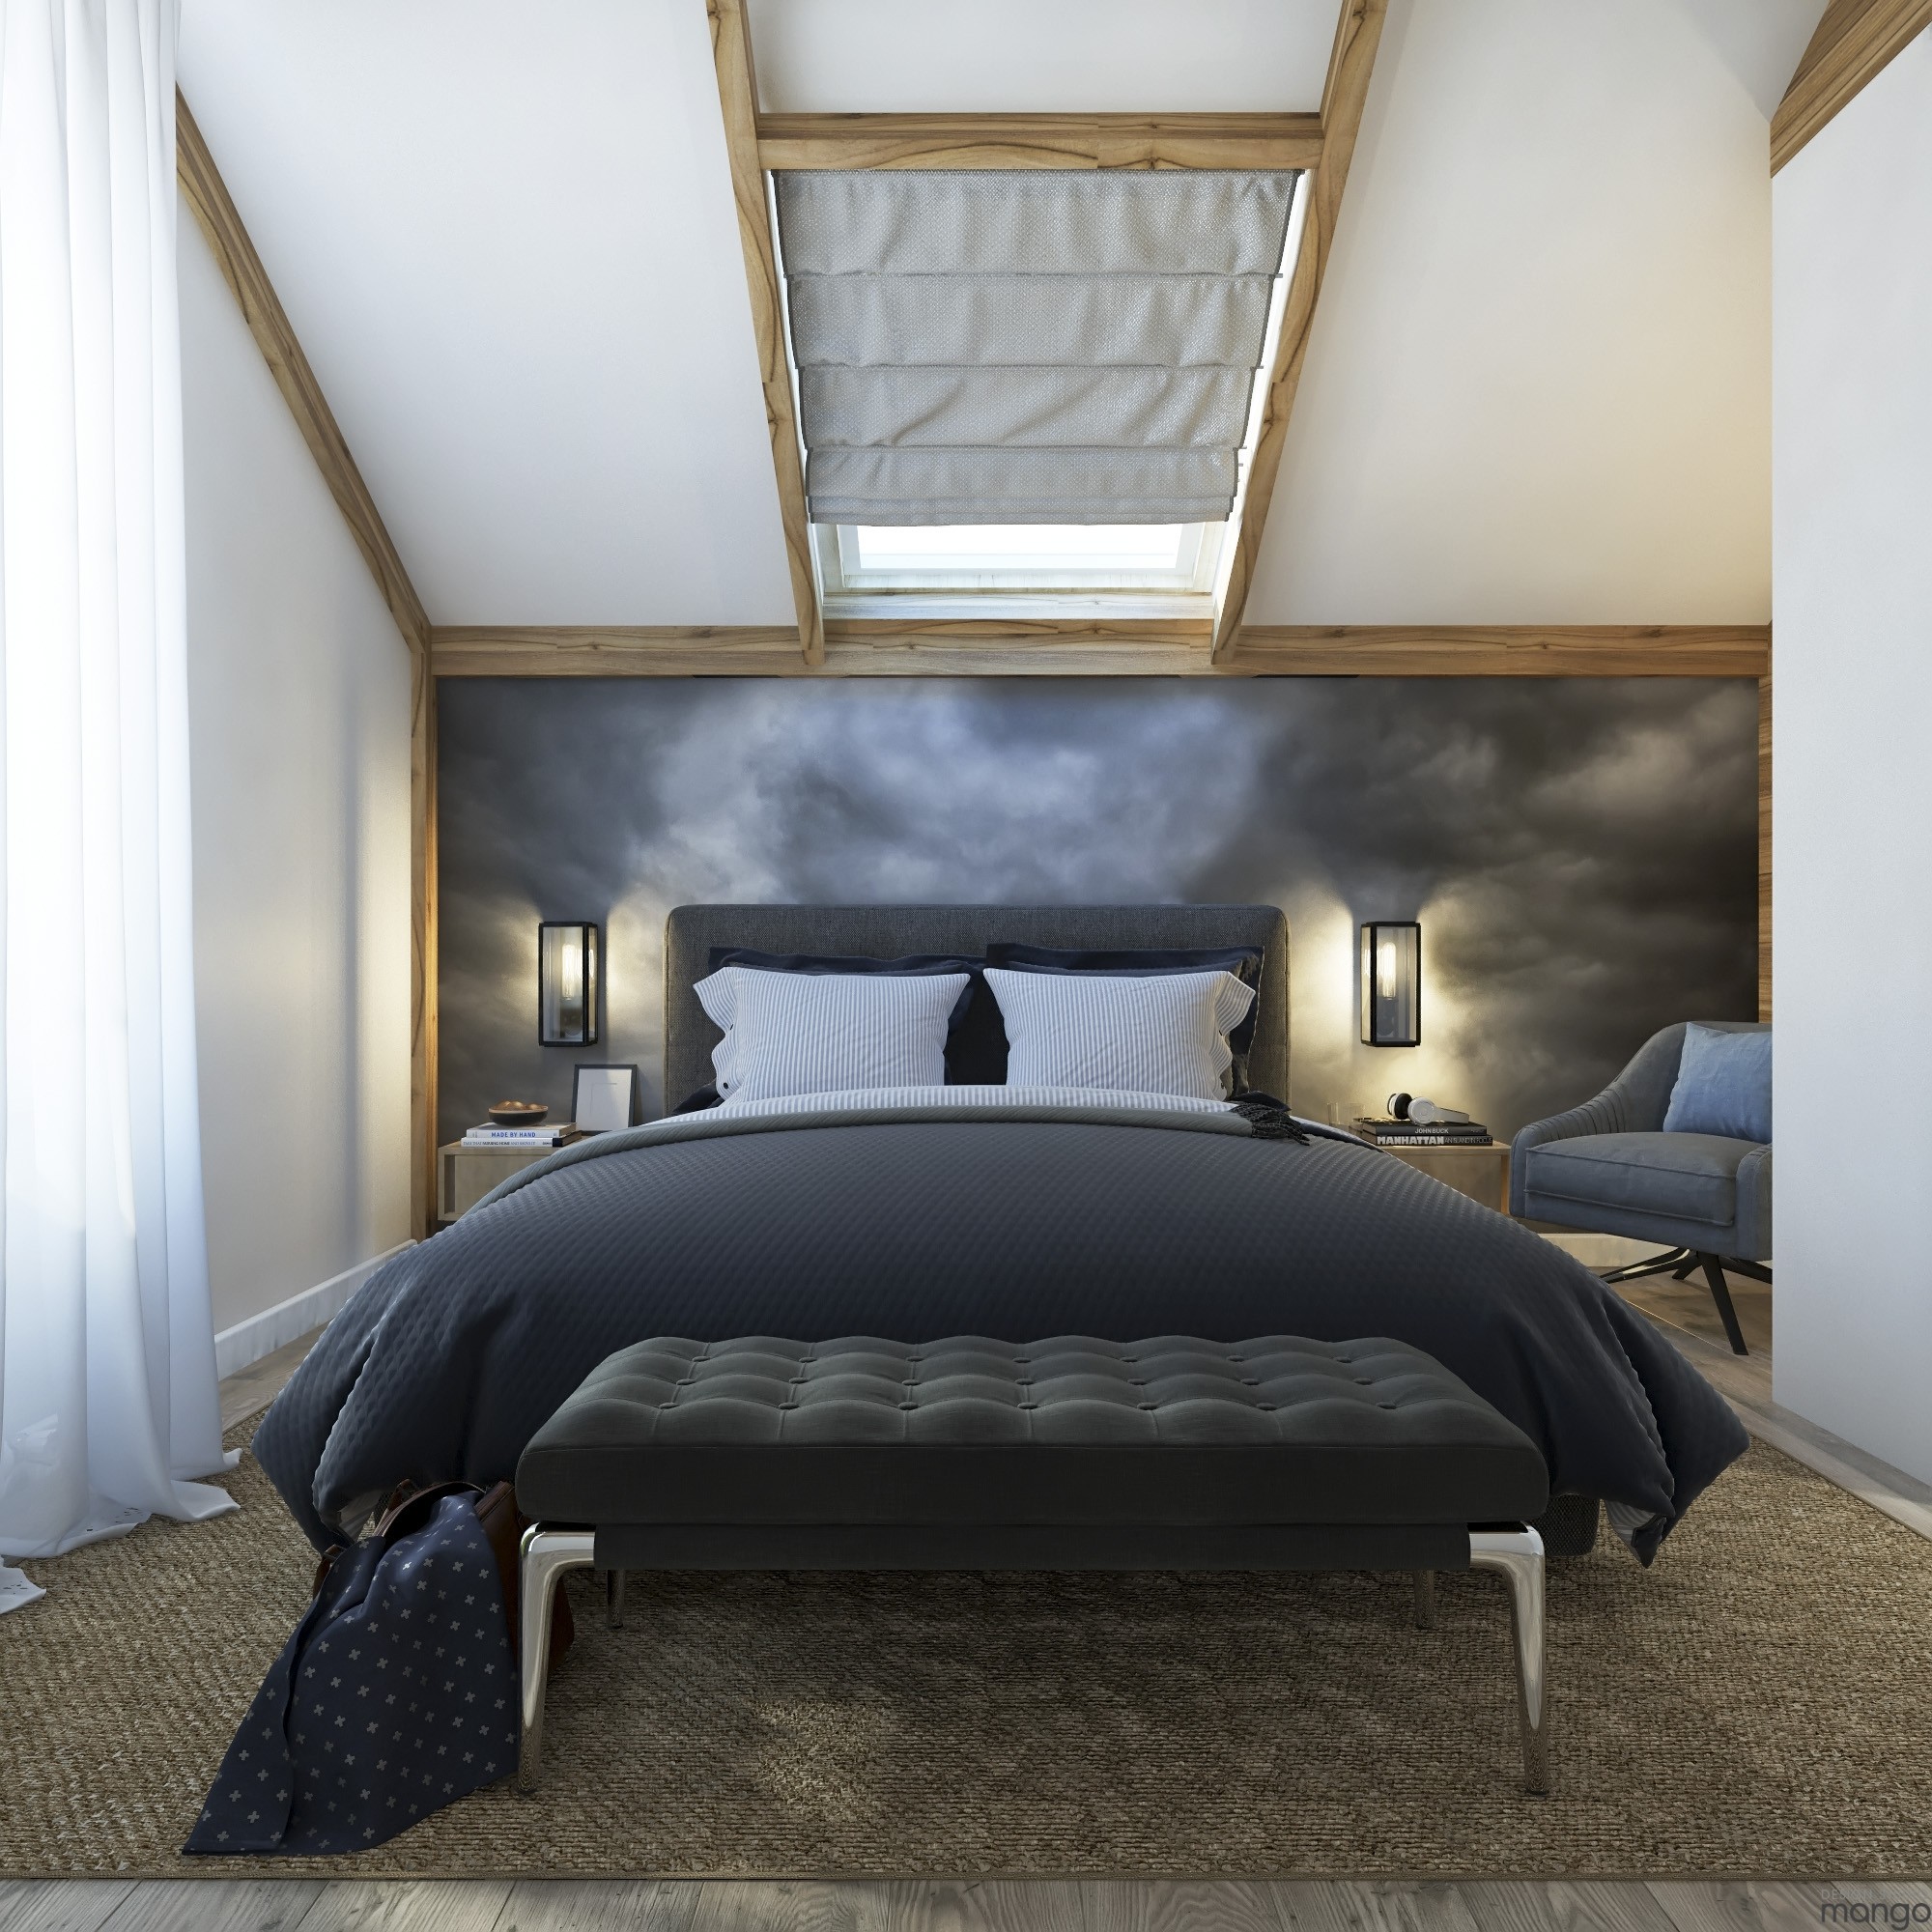 Luxury gray bedroom design "width =" 2000 "height =" 2000 "srcset =" https://mileray.com/wp-content/uploads/2020/05/1588508608_182_Inspiration-Of-Bedroom-Decorating-Ideas-Which-Applying-a-Trendy-Design.jpg 2000w, https: / /mileray.com/wp-content/uploads/2016/11/Design-Studio-Mango4-6-150x150.jpg 150w, https://mileray.com/wp-content/uploads/2016/11/Design-Studio- Mango4-6-300x300.jpg 300w, https://mileray.com/wp-content/uploads/2016/11/Design-Studio-Mango4-6-768x768.jpg 768w, https://mileray.com/wp- content / uploads / 2016/11 / Design-Studio-Mango4-6-1024x1024.jpg 1024w, https://mileray.com/wp-content/uploads/2016/11/Design-Studio-Mango4-6-696x696.jpg 696w, https://mileray.com/wp-content/uploads/2016/11/Design-Studio-Mango4-6-1068x1068.jpg 1068w, https://mileray.com/wp-content/uploads/2016/11 /Design-Studio-Mango4-6-420x420.jpg 420w "sizes =" (maximum width: 2000px) 100vw, 2000px